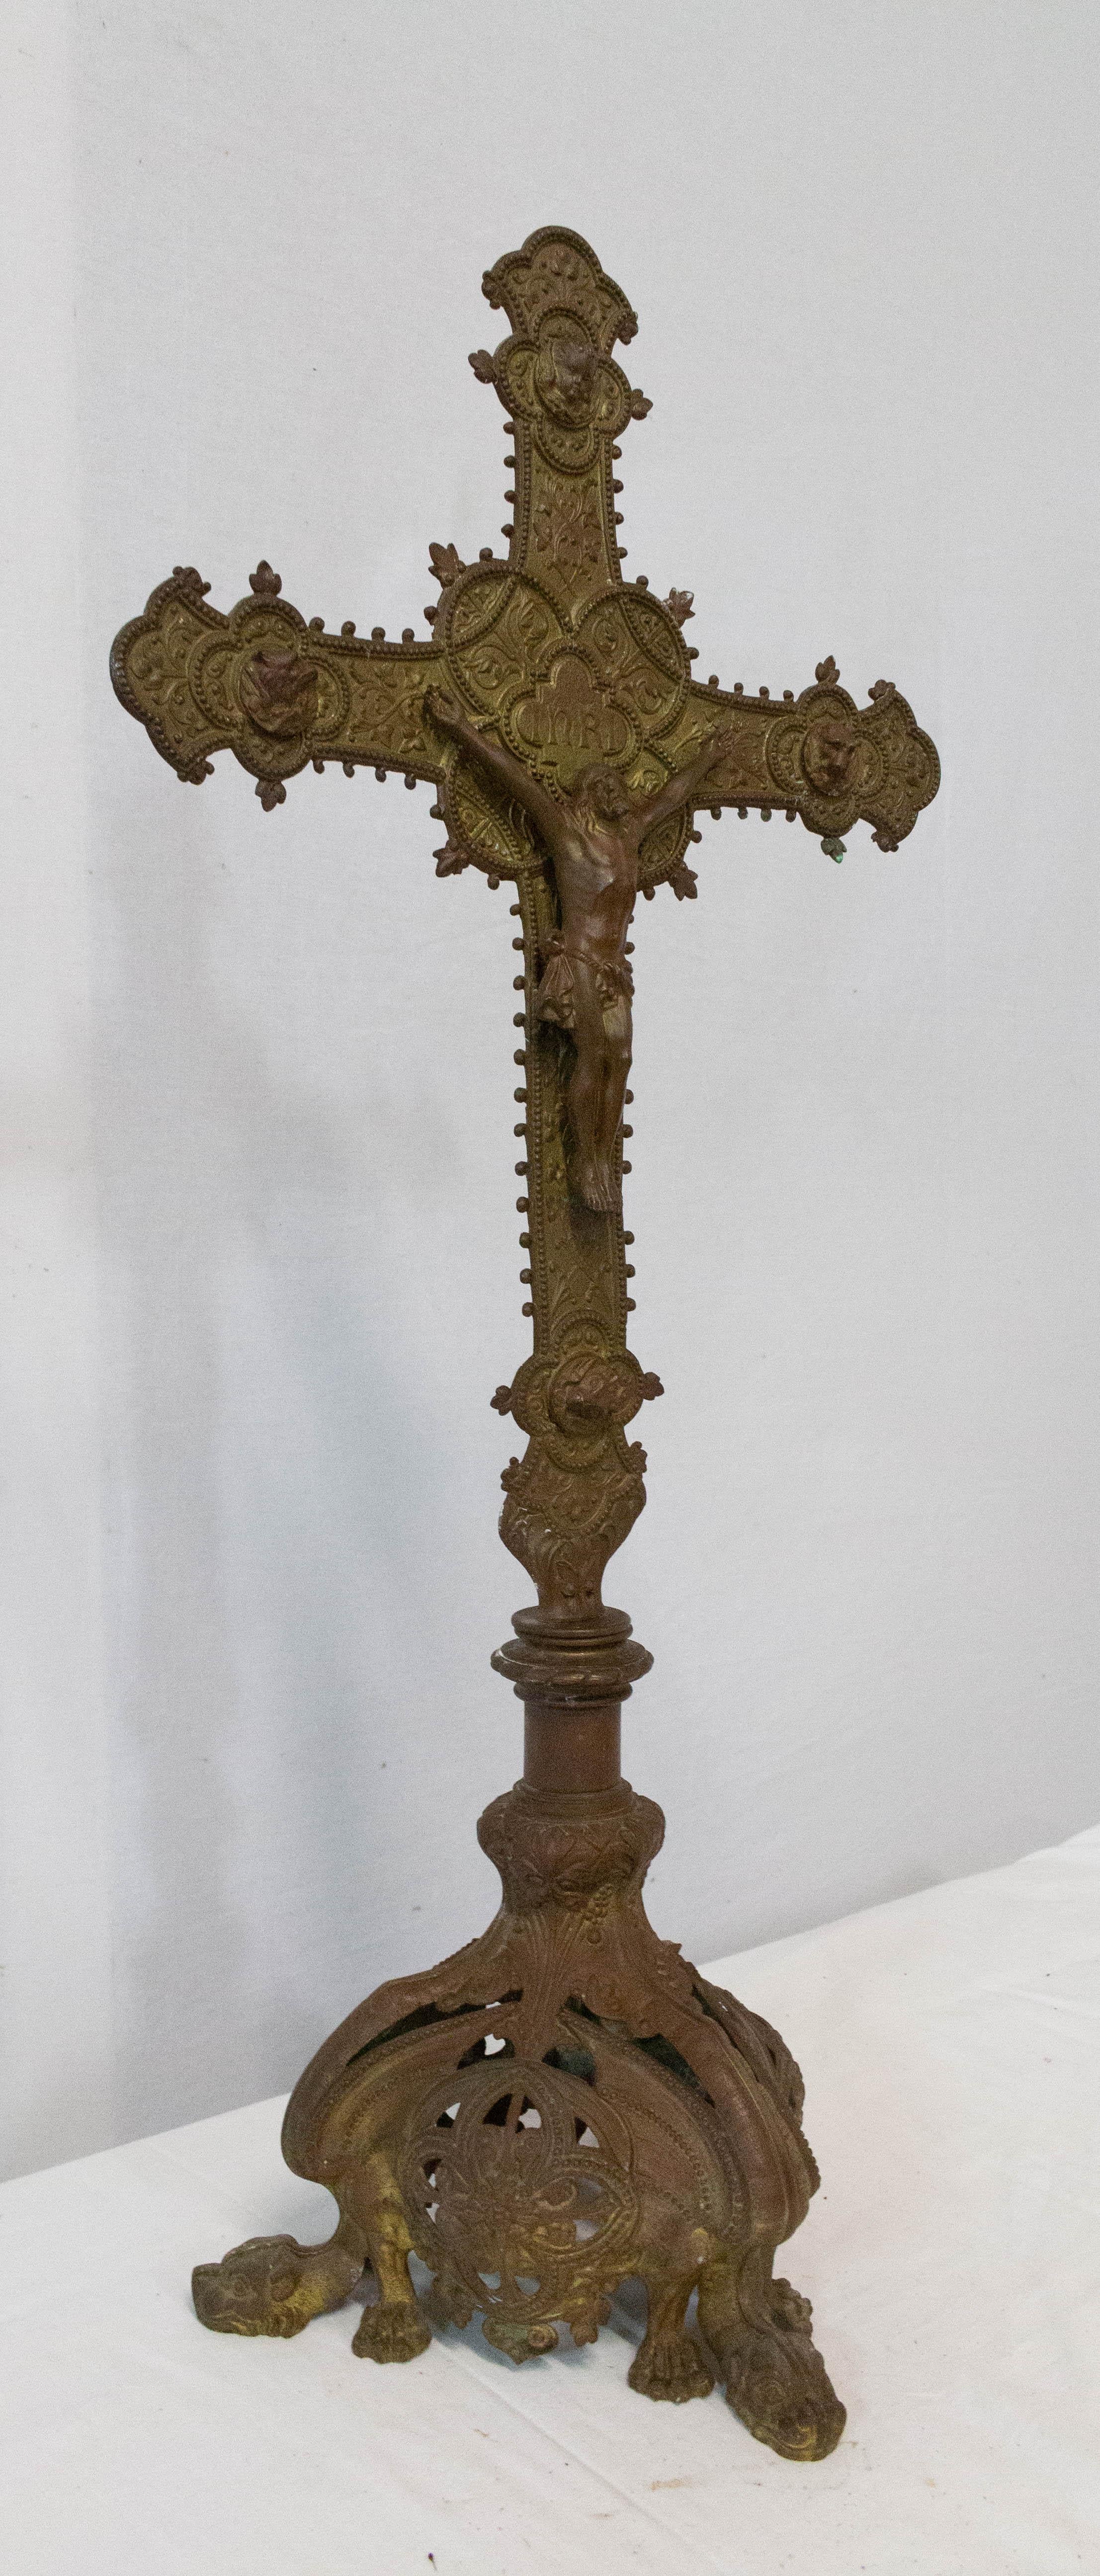 Crucifix on pedestal for altar French late 19th century
Golden copper (please see photos)
Around the christ on the cross, you can see the four evangelists represented in their allegorical forms of the tetramorph: the winged man or the angel for